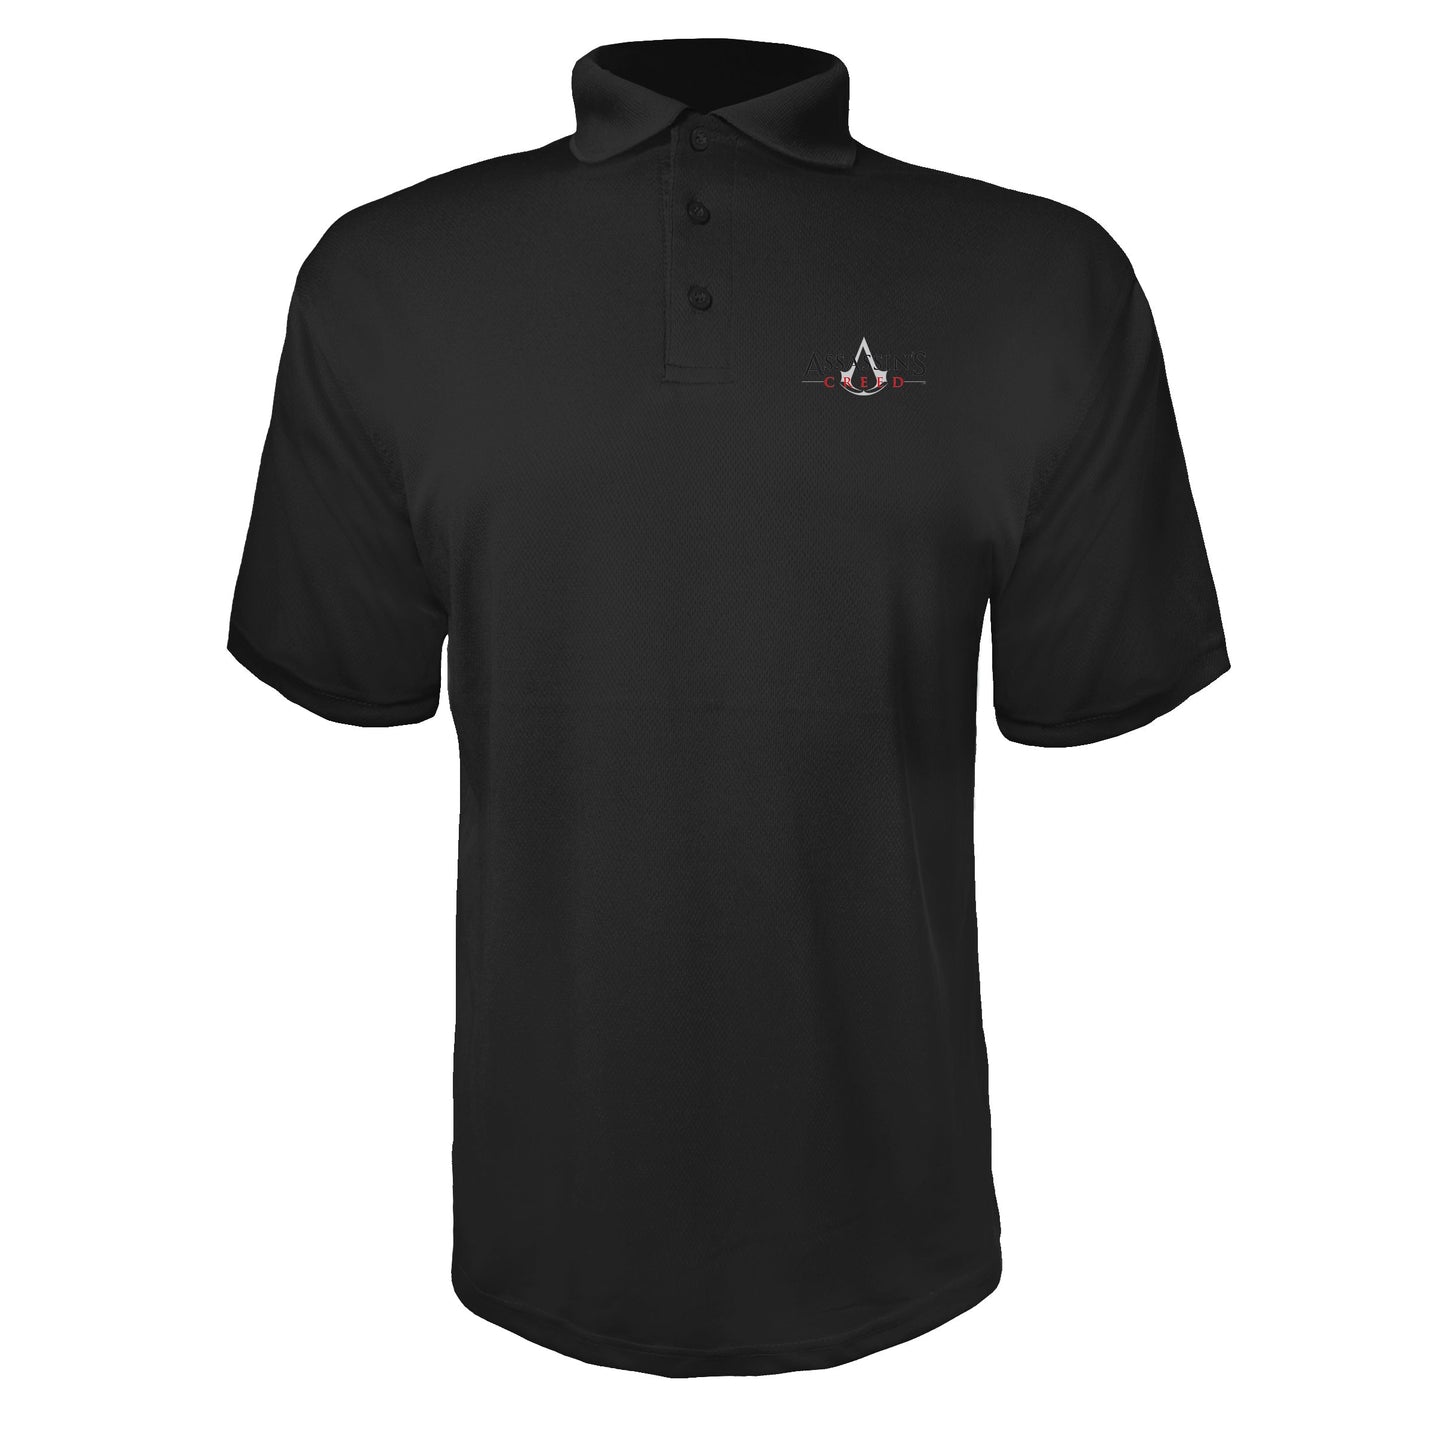 Men's Assassins Creed Game Polyester Polo